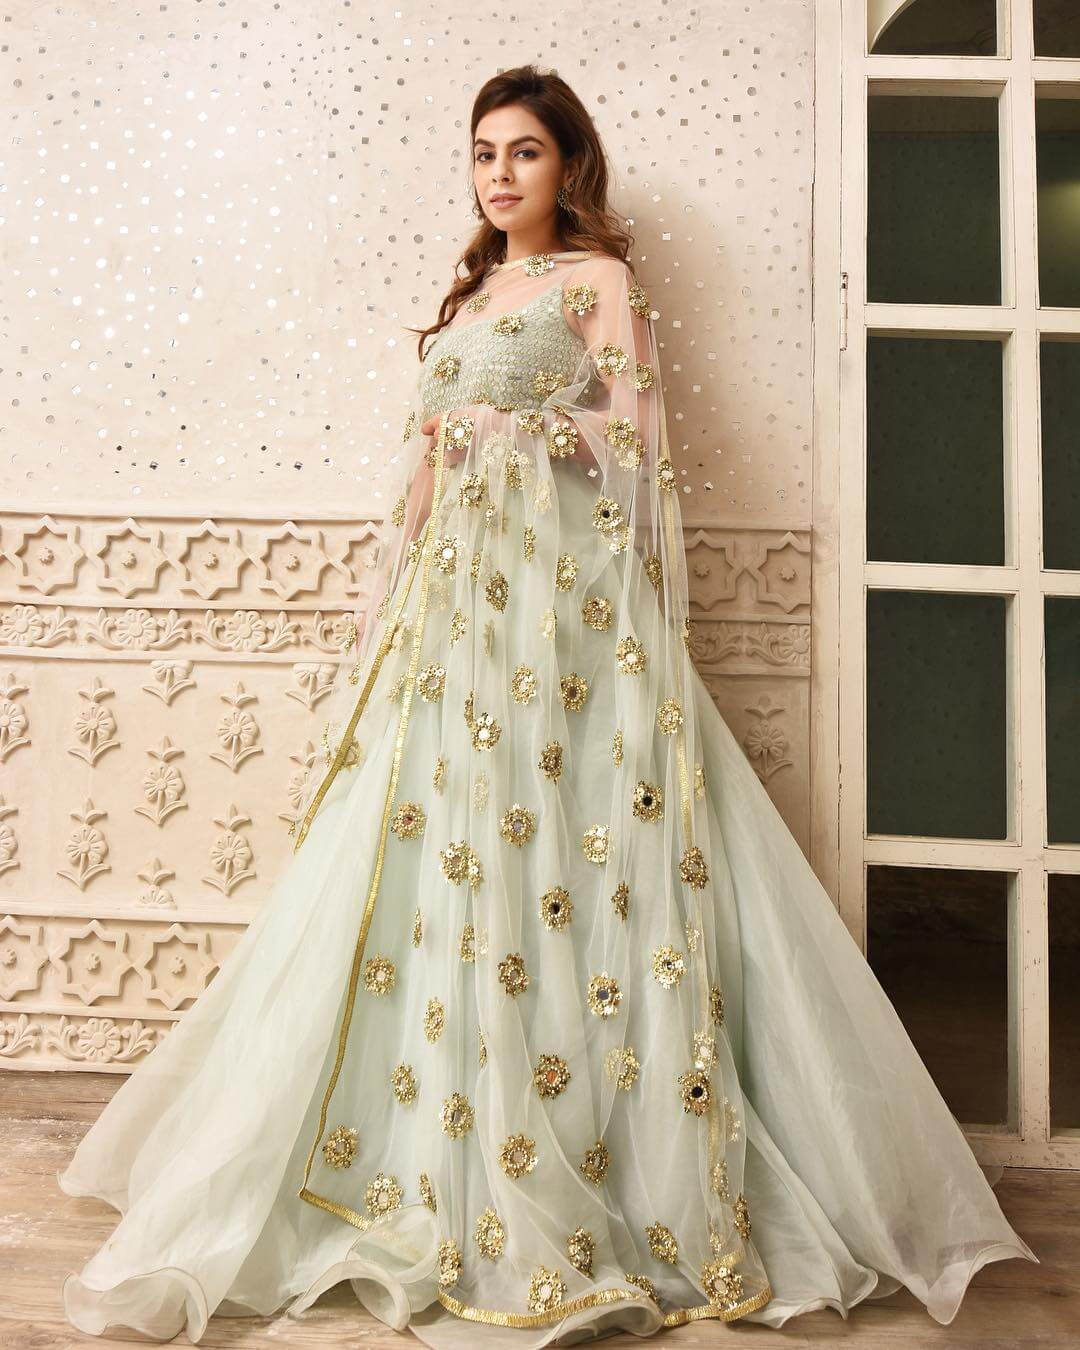 Let this wedding season make you look like an Evening Star!